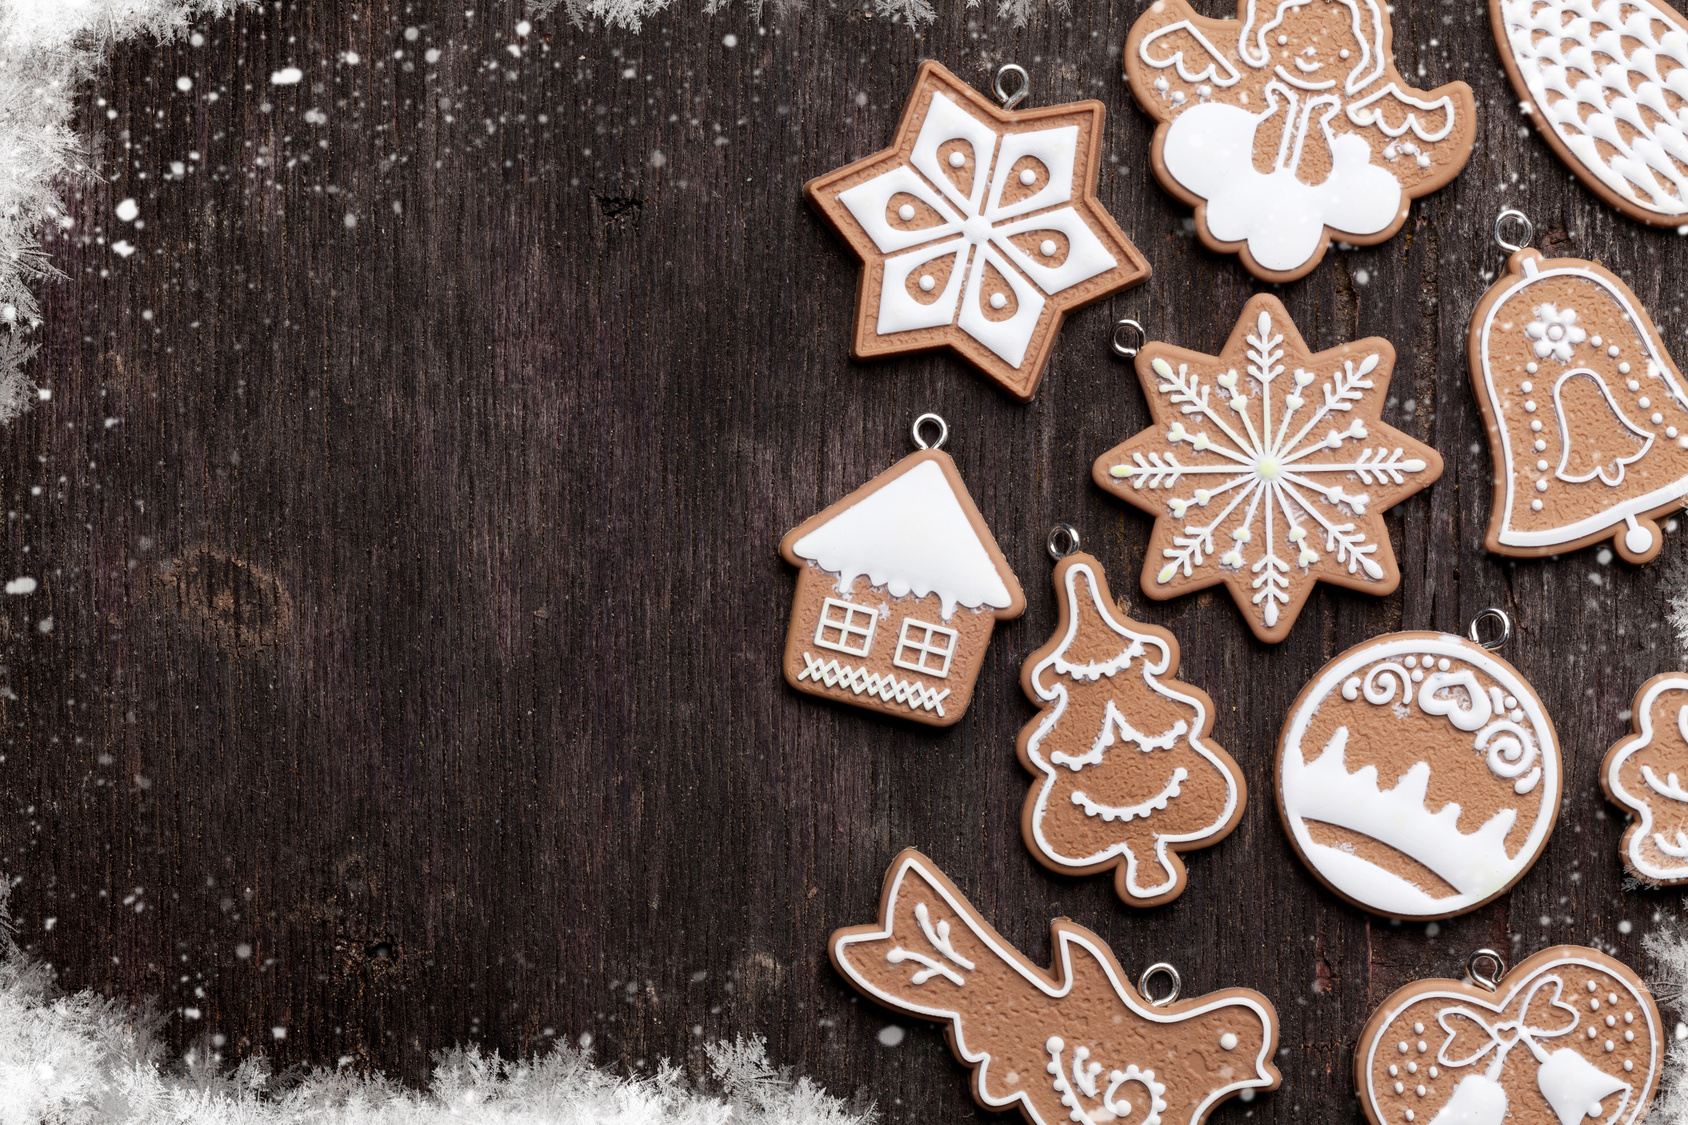 Christmas wooden background with gingerbread cookies. Top view with copy space for your greetings